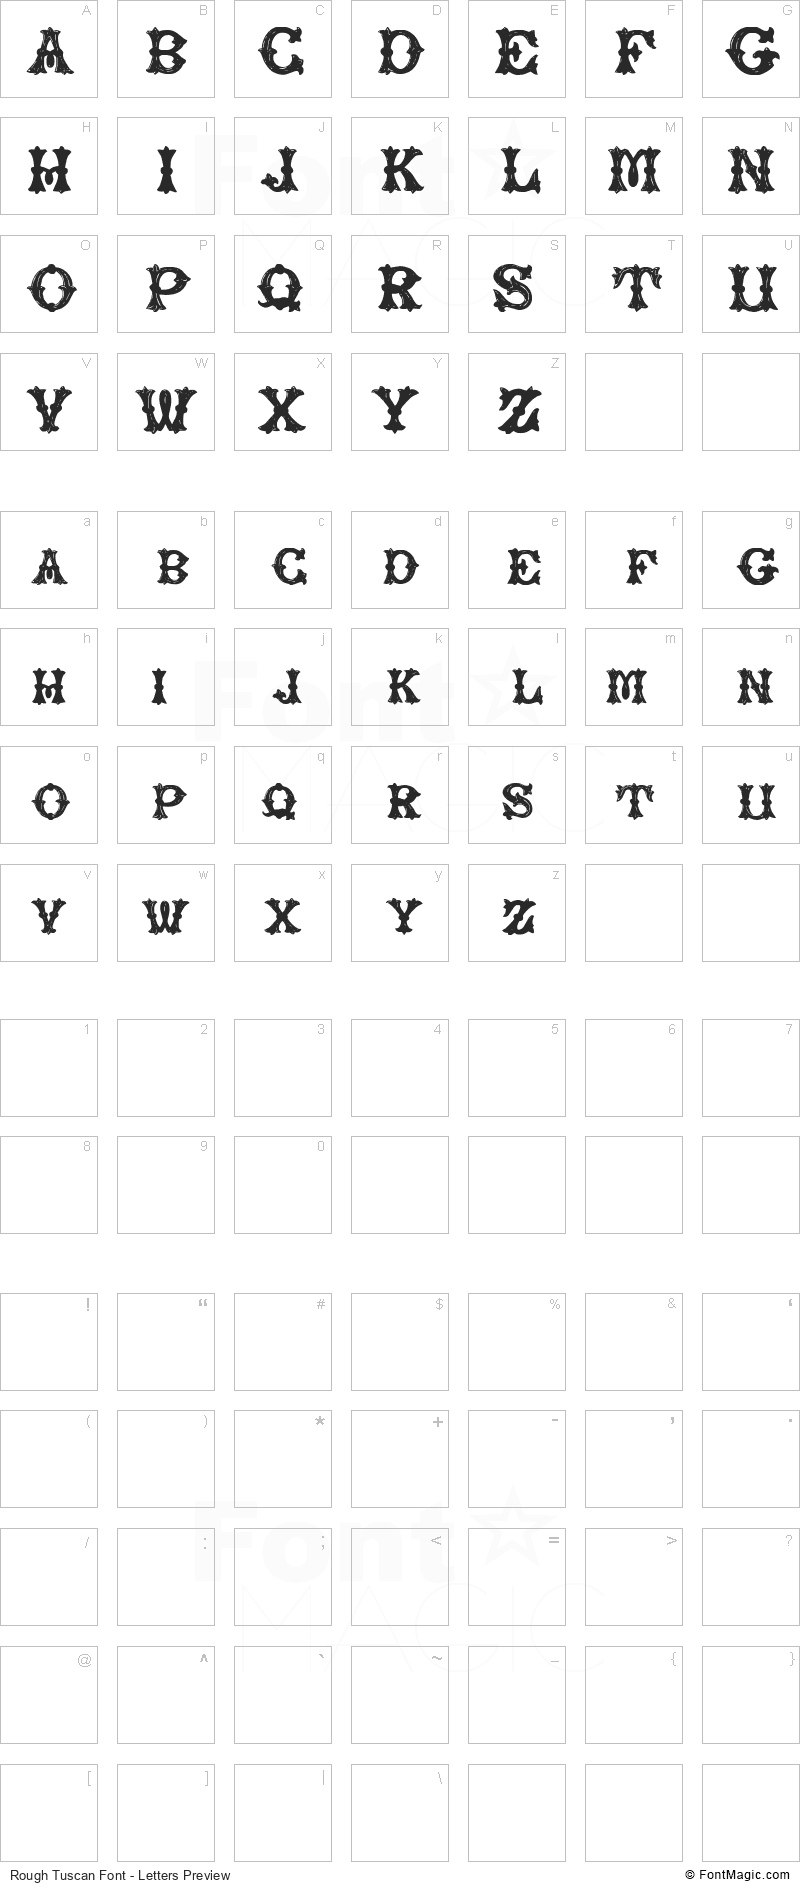 Rough Tuscan Font - All Latters Preview Chart